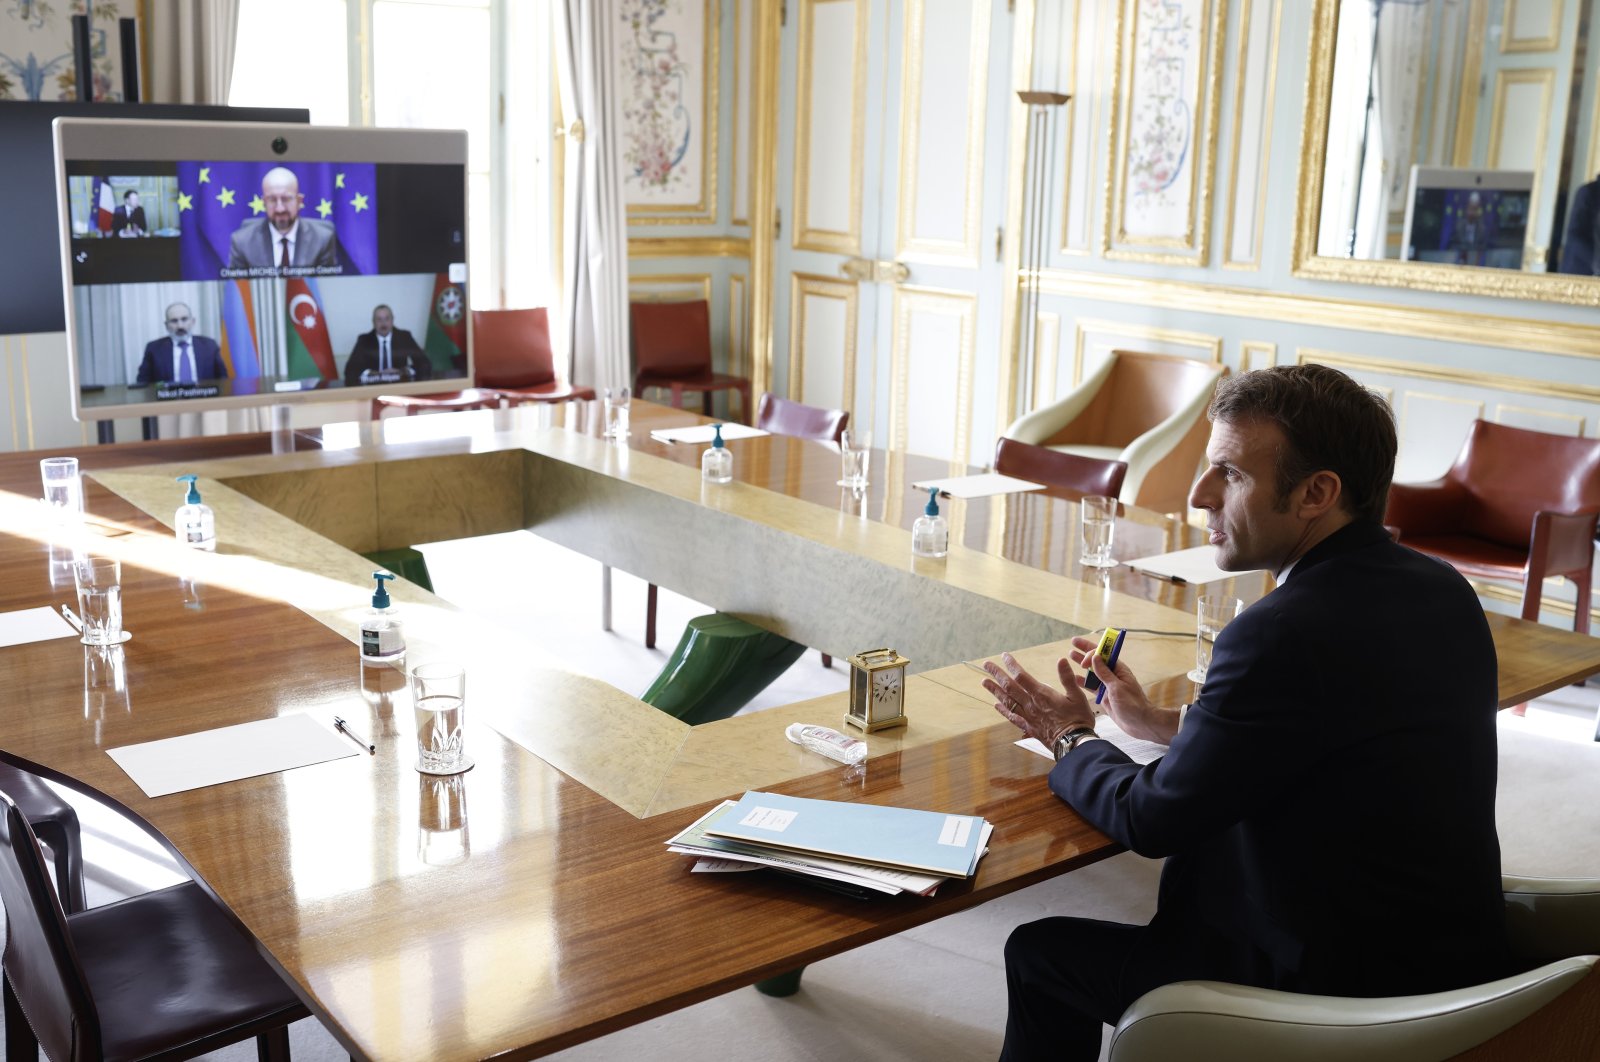 French President Emmanuel Macron holds a videoconference meeting with Armenian Prime Minister Nikol Pashinyan (screen, L), Azerbaijan President Ilham Aliev (screen, R) and European Council President Charles Michel (screen, top) at the Elysee Palace in Paris, France, Feb. 4, 20222. (AP Photo)